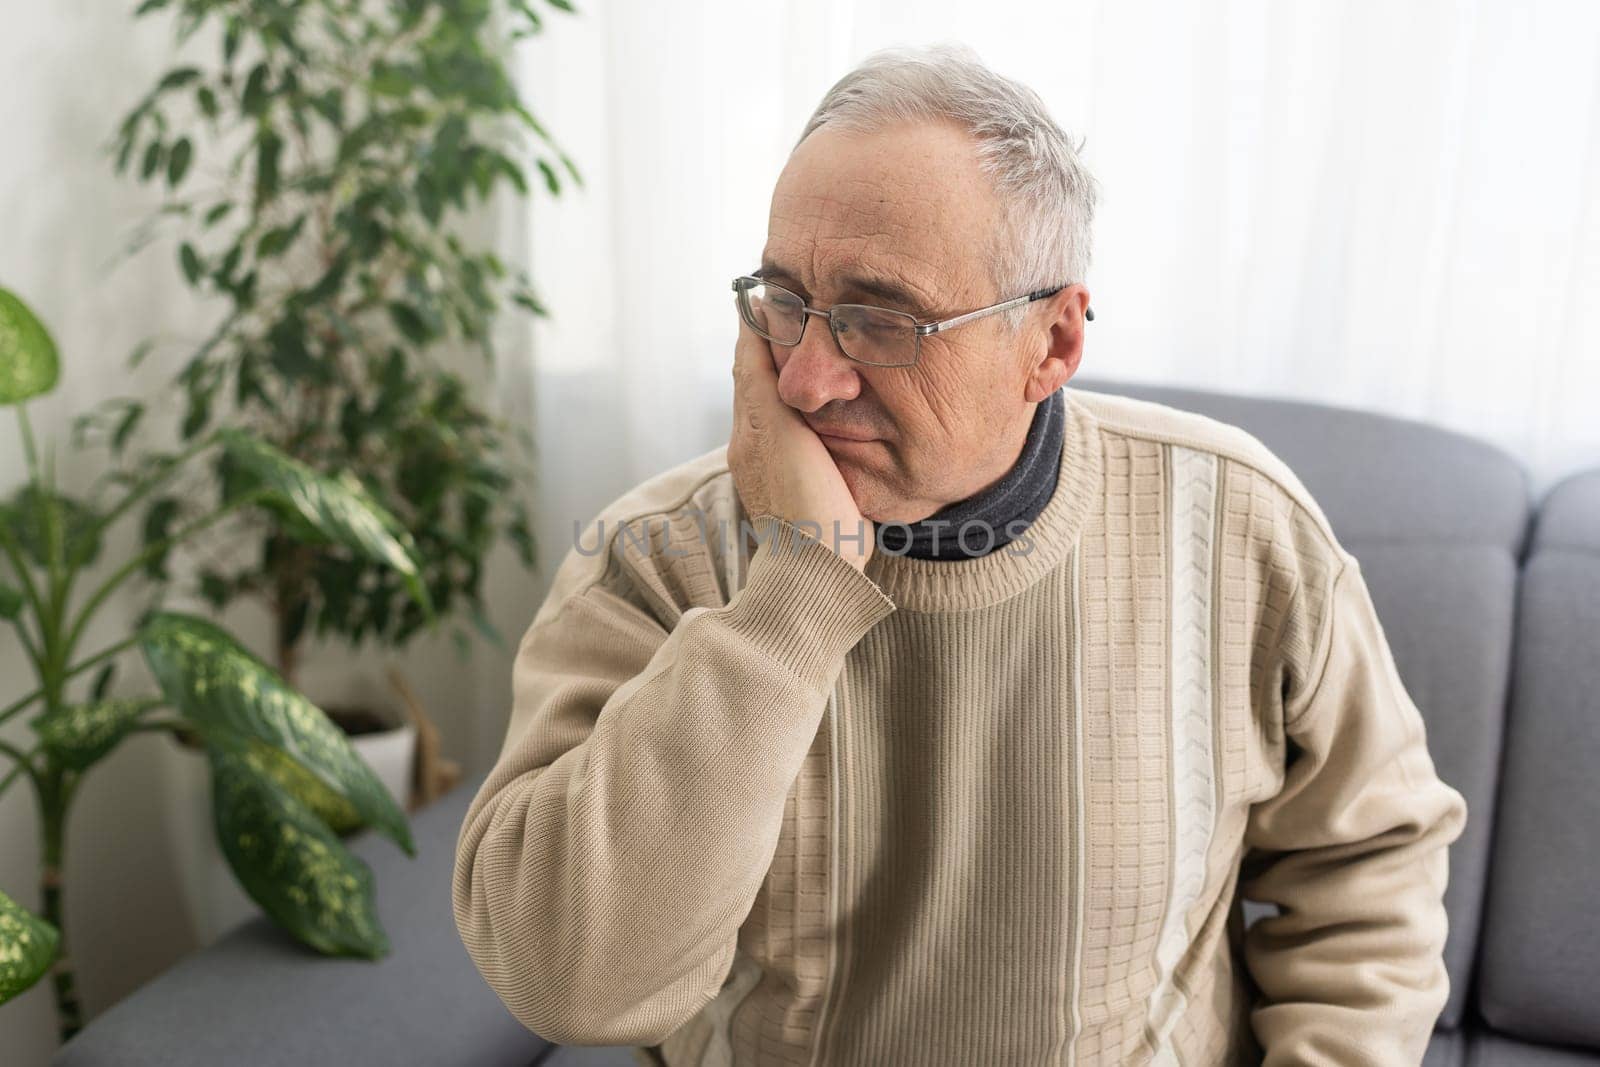 Old man with toothache. Elderly senior man has toothache. Unhappy man face in tooth pain sitting on sofa at home, feel sick unwell. Sad aged man hand holding his chin. Adult suffering toothache.